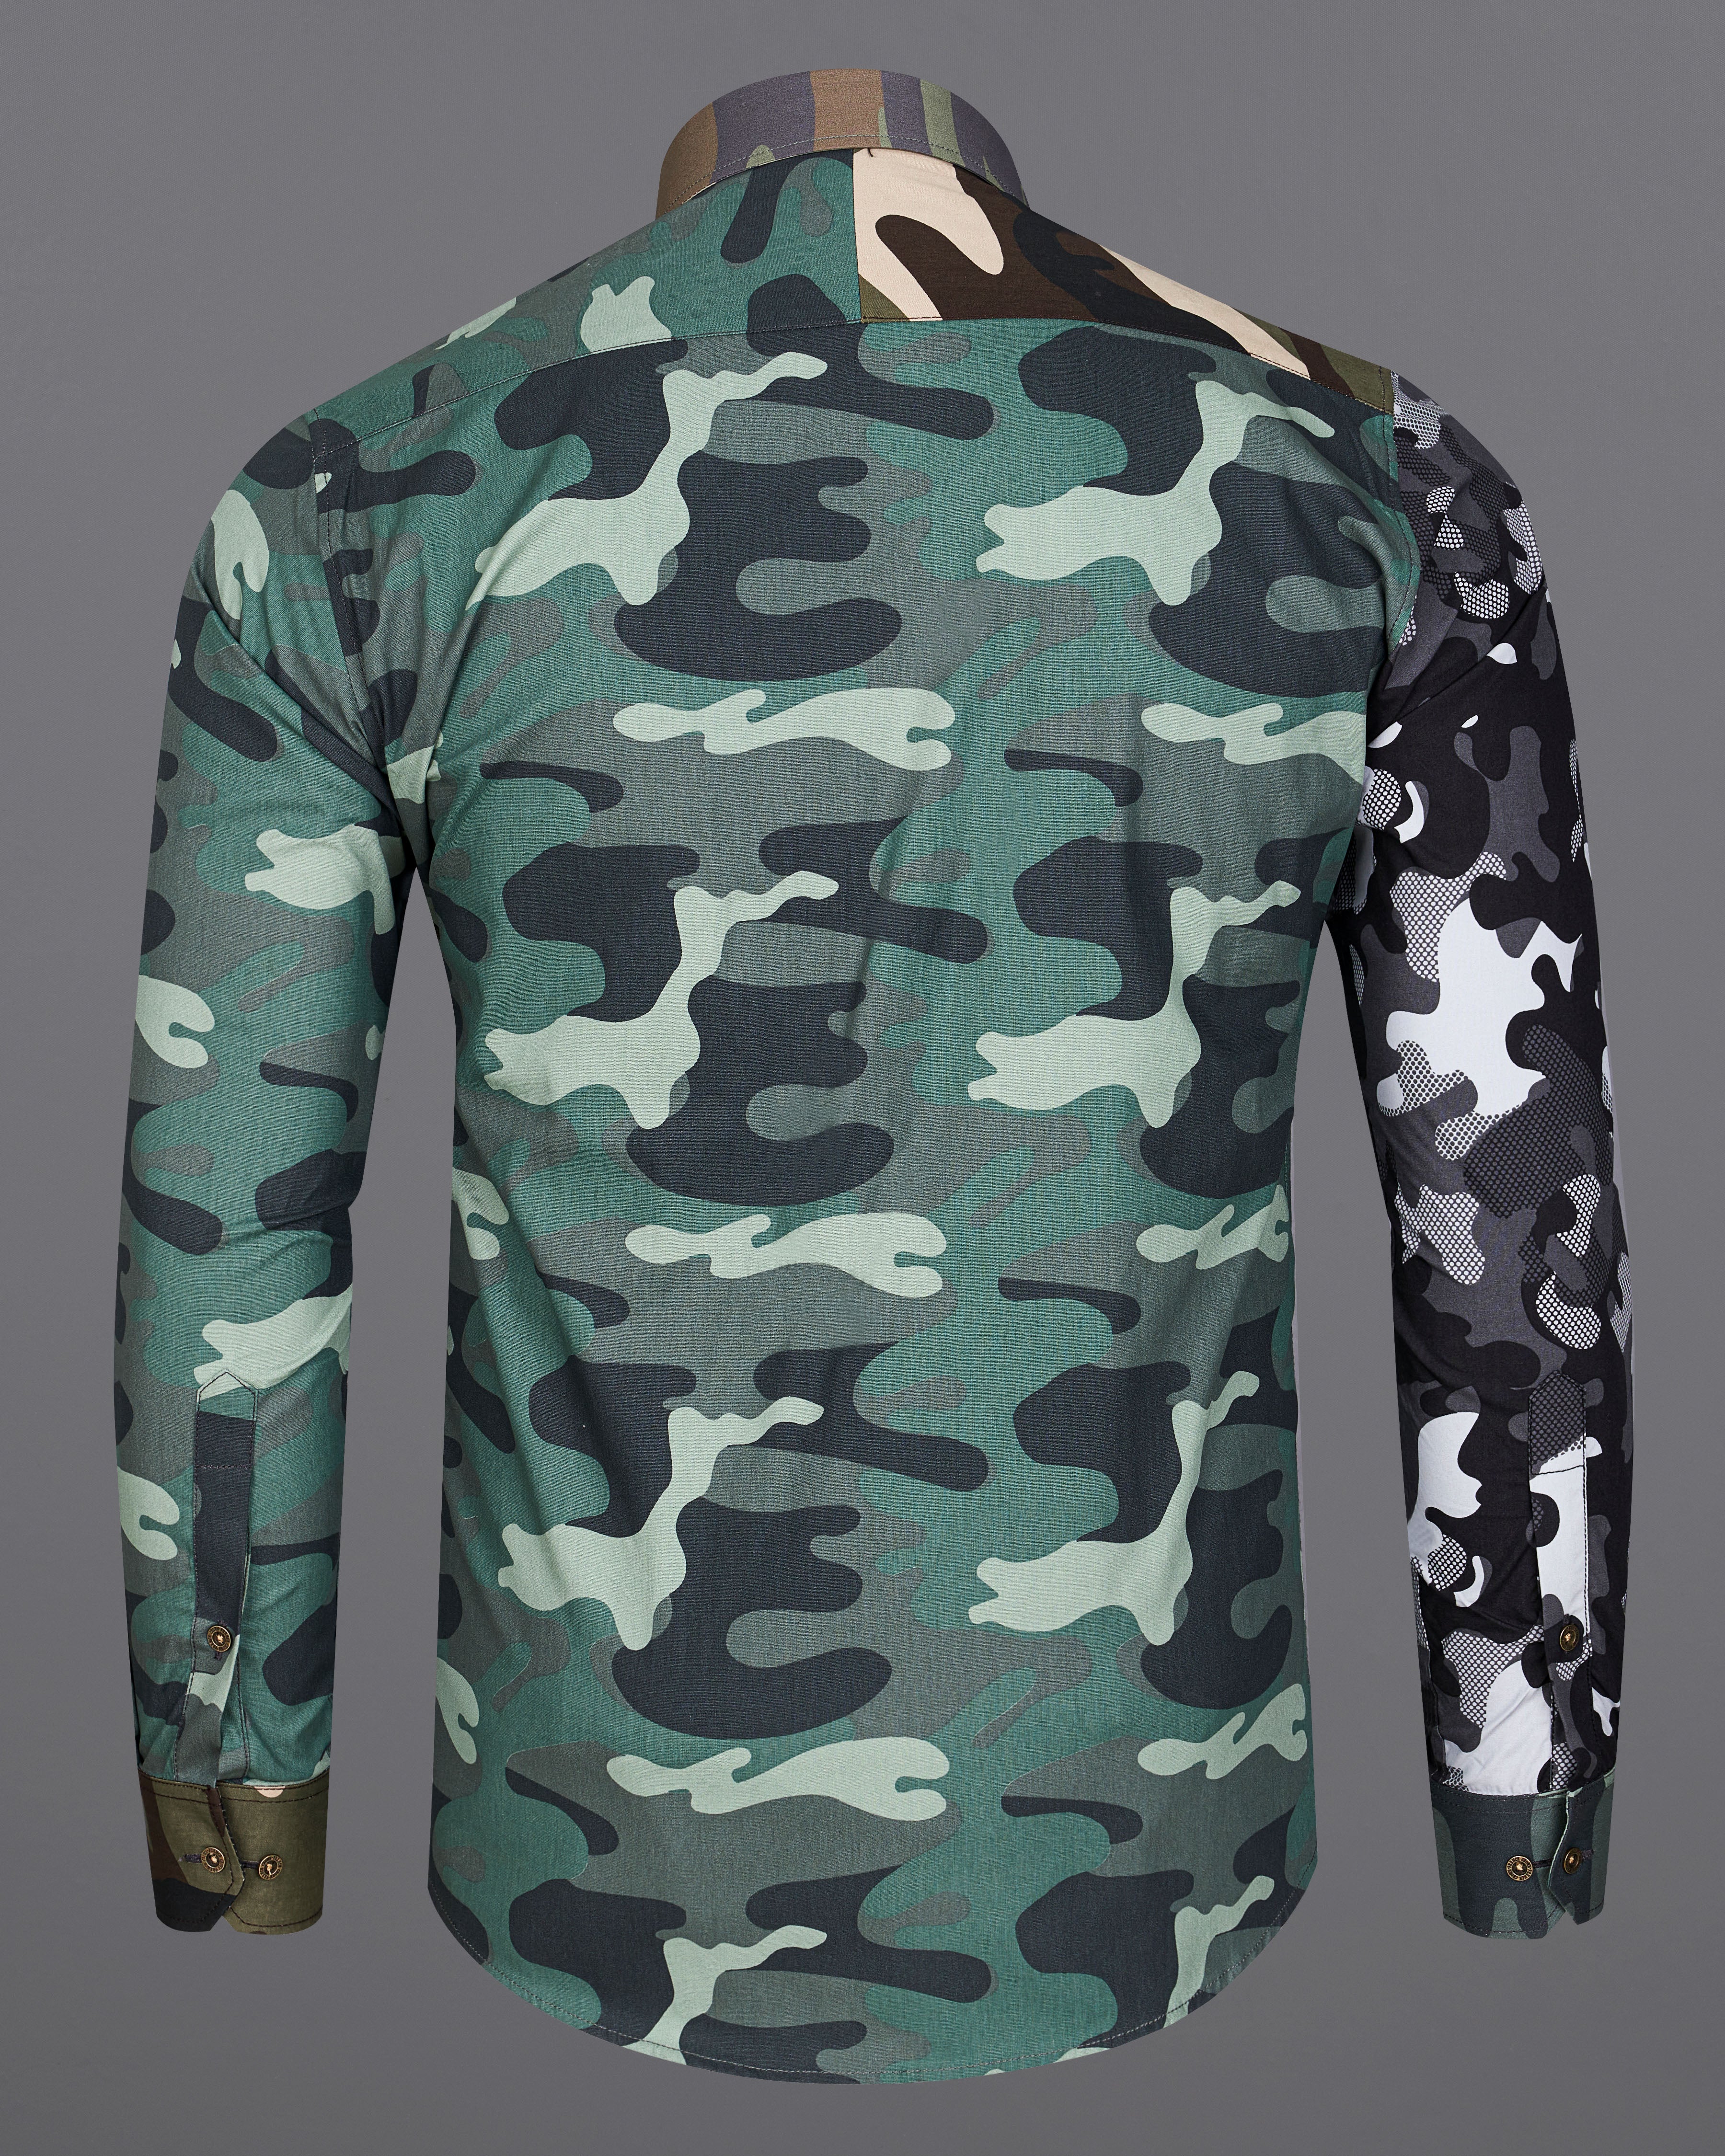 Casal Green with Gunmetal Blue Multicolour Camouflage Military Printed Royal Oxford Designer Shirt 8907-MB-P331-38, 8907-MB-P331-H-38,  8907-MB-P331-39,  8907-MB-P331-H-39,  8907-MB-P331-40,  8907-MB-P331-H-40,  8907-MB-P331-42,  8907-MB-P331-H-42,  8907-MB-P331-44,  8907-MB-P331-H-44,  8907-MB-P331-46,  8907-MB-P331-H-46,  8907-MB-P331-48,  8907-MB-P331-H-48,  8907-MB-P331-50,  8907-MB-P331-H-50,  8907-MB-P331-52,  8907-MB-P331-H-52